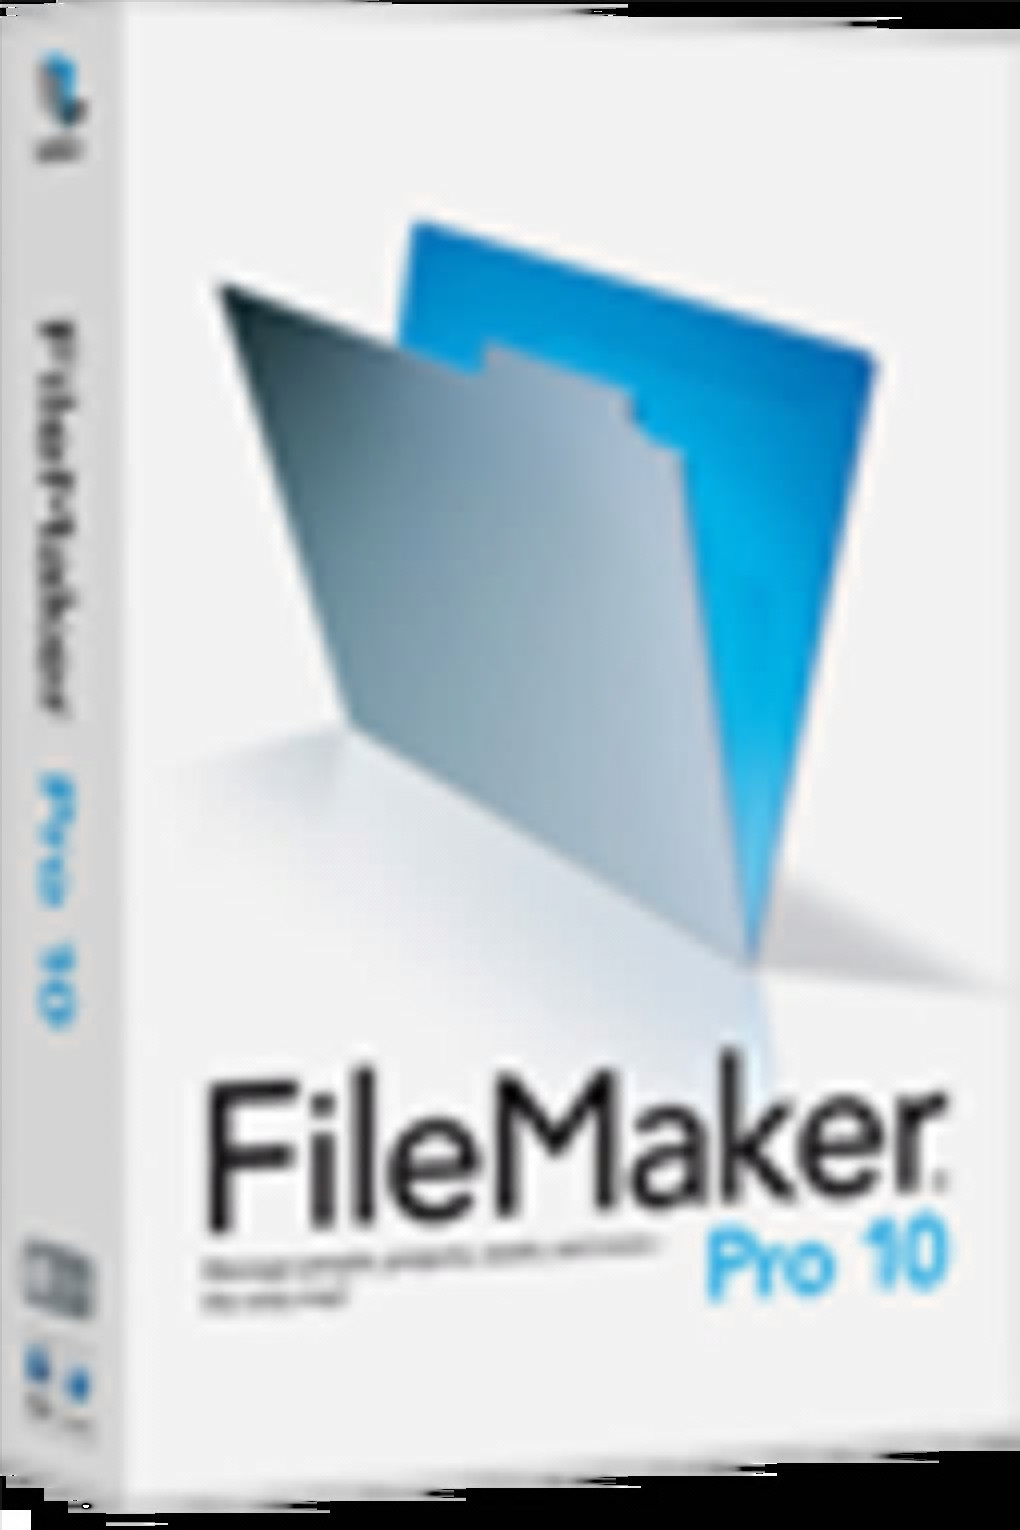 The appearance "FileMaker"